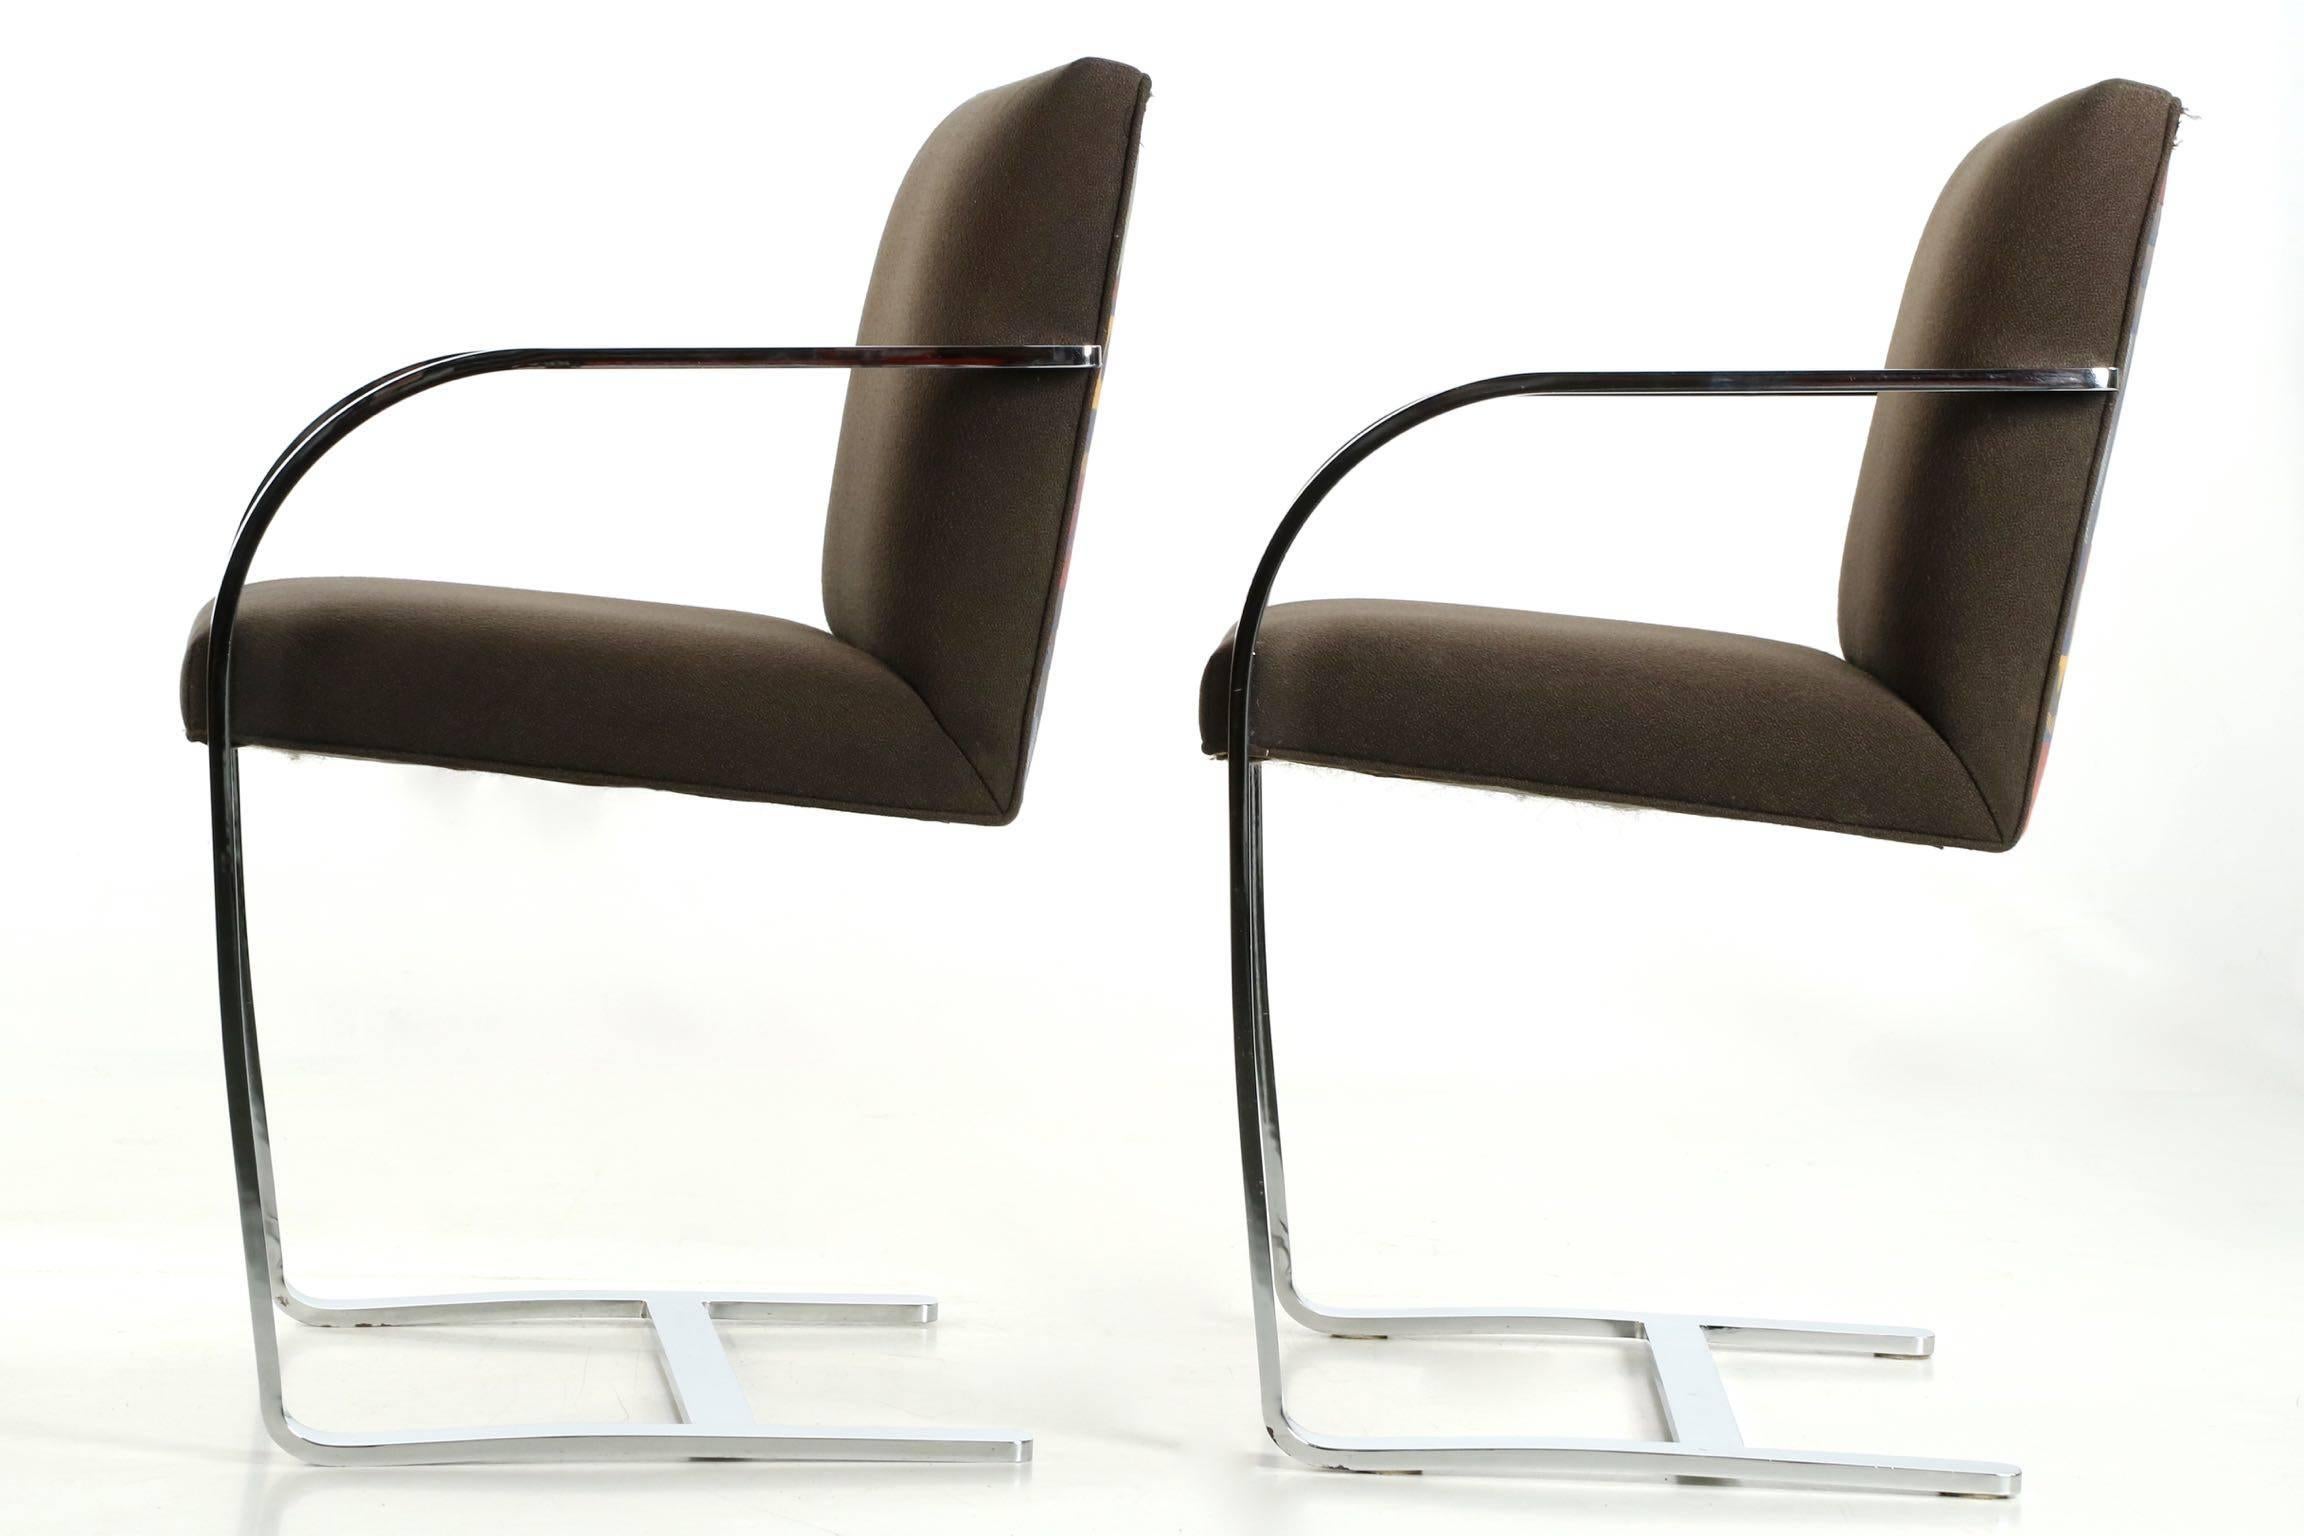 20th Century Vintage Set of Four Chromed Flat Arm Chairs after Mies Van Der Rohe BRNO